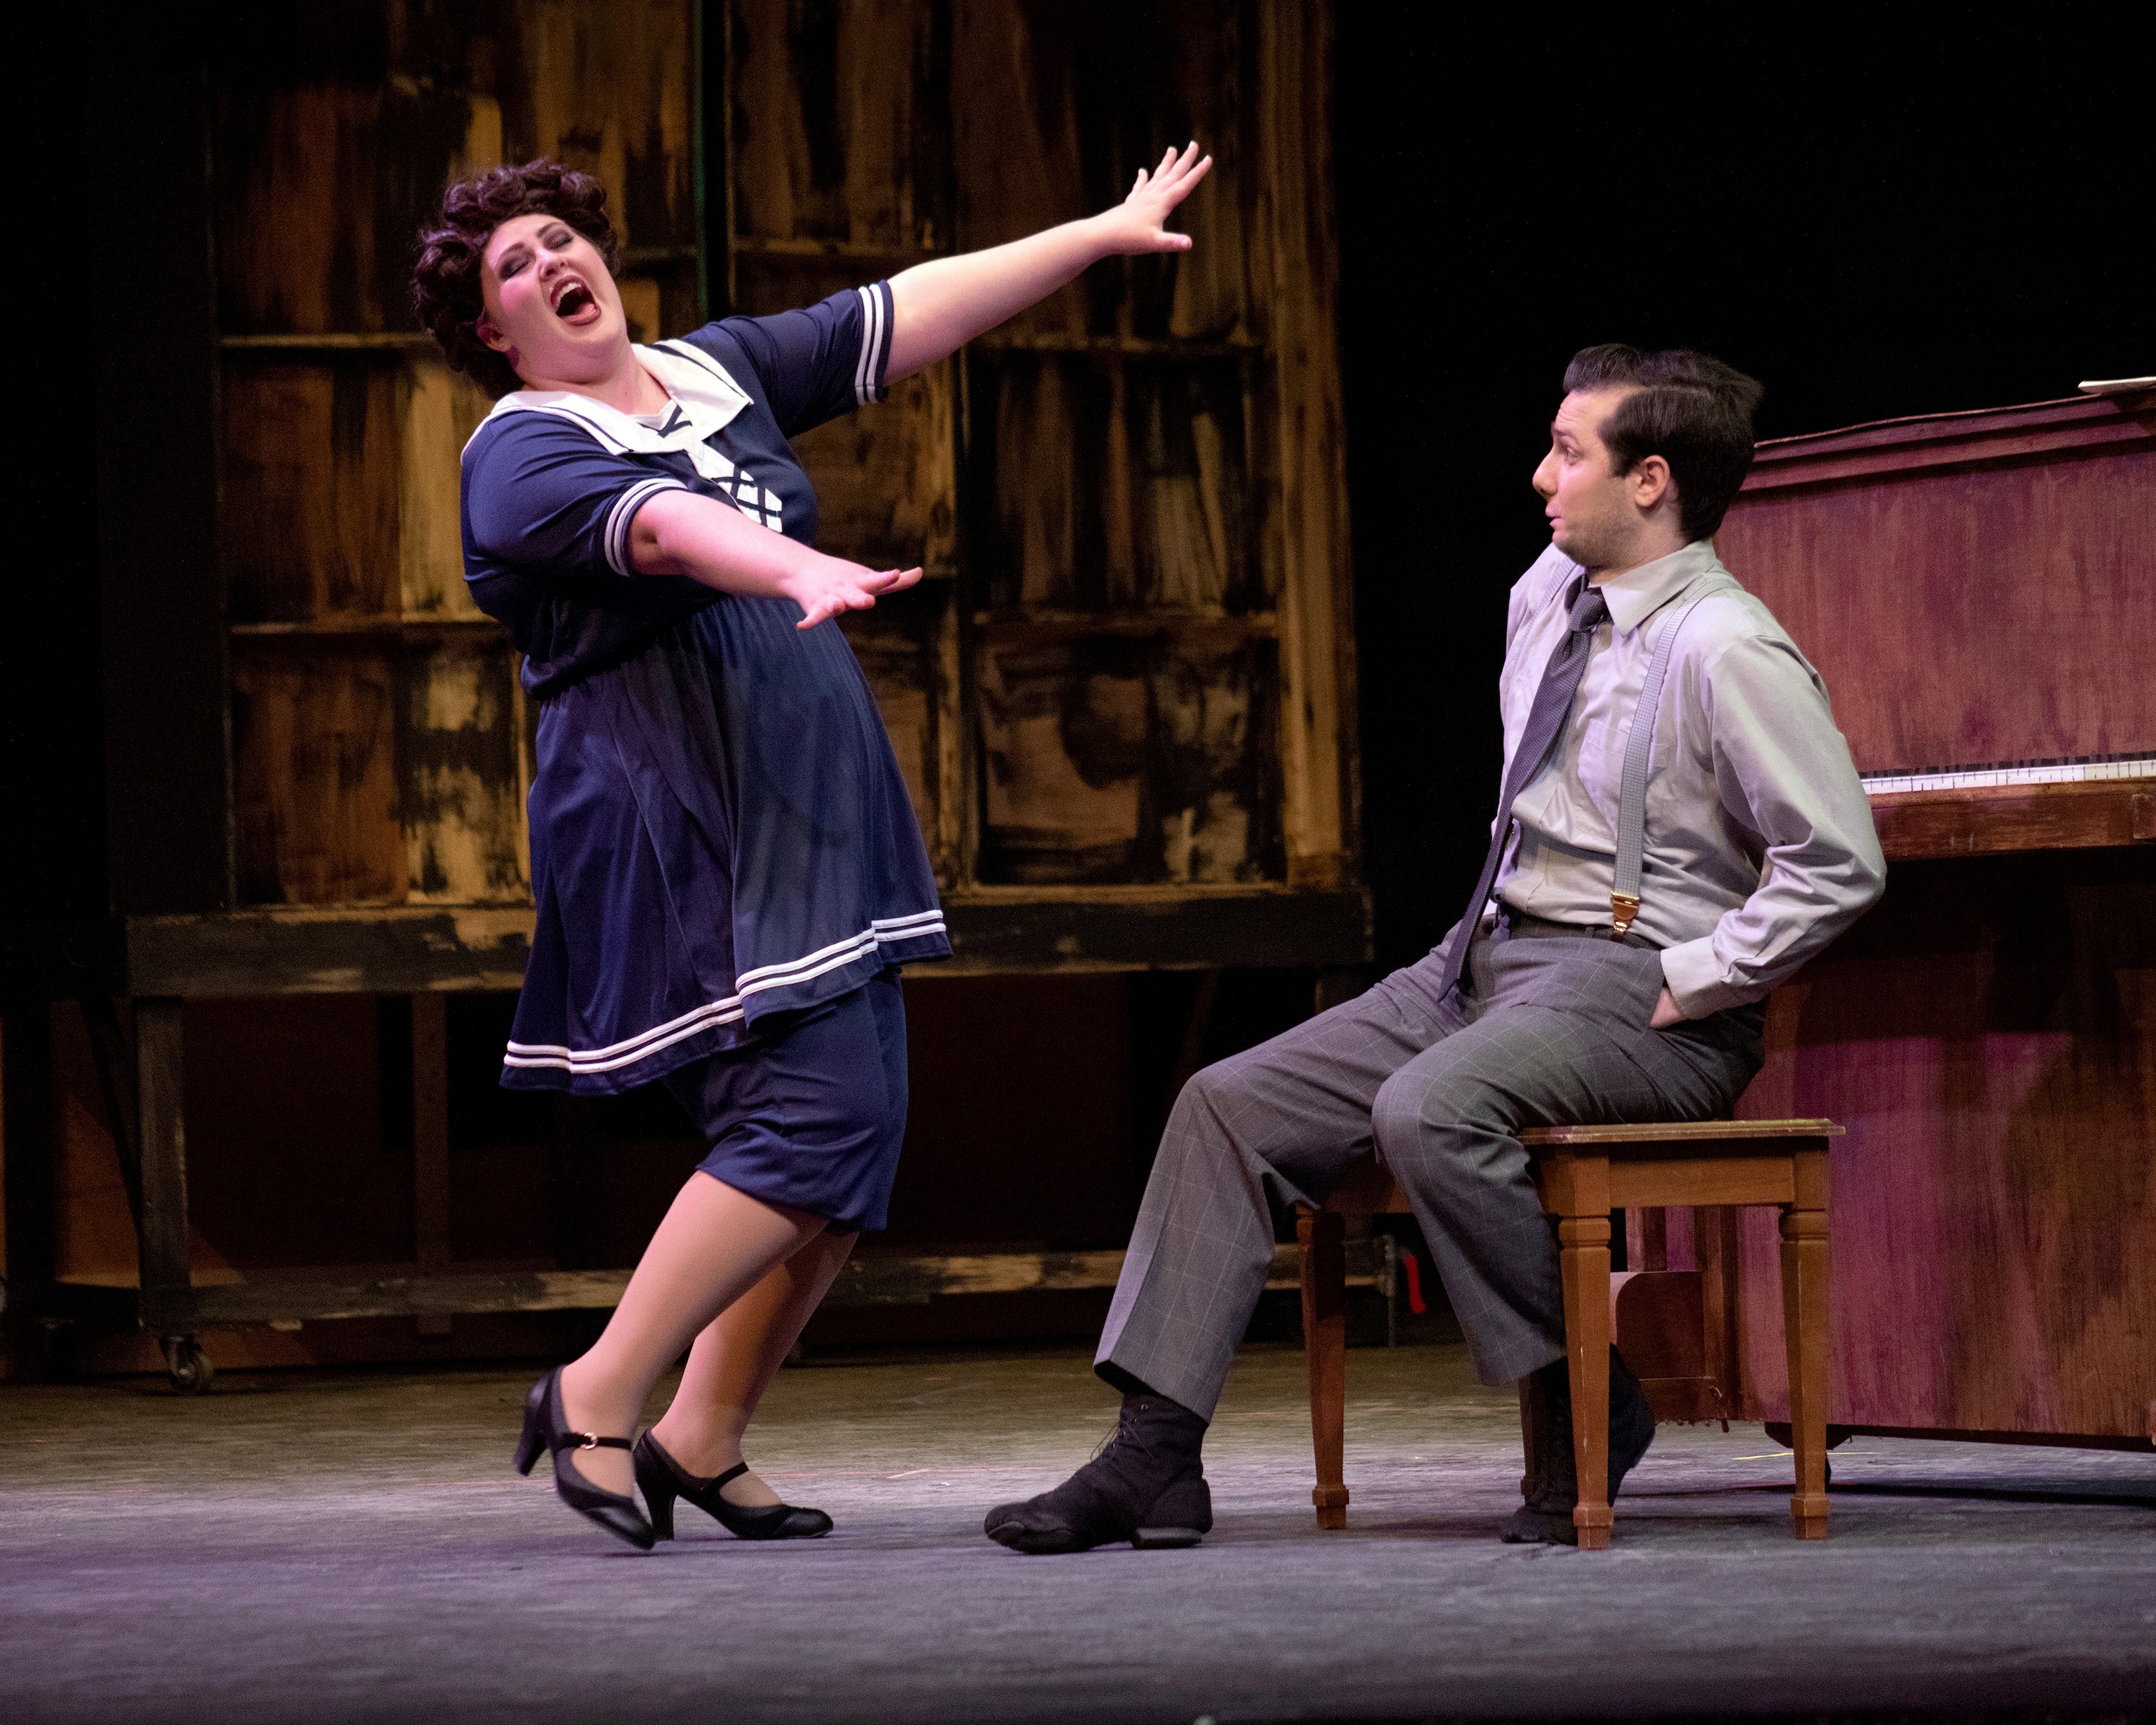 REVIEW: Sound issues plague Funny Girl at Spokane Civic Theatre | Arts &  Culture | Spokane | The Pacific Northwest Inlander | News, Politics, Music,  Calendar, Events in Spokane, Coeur d'Alene and